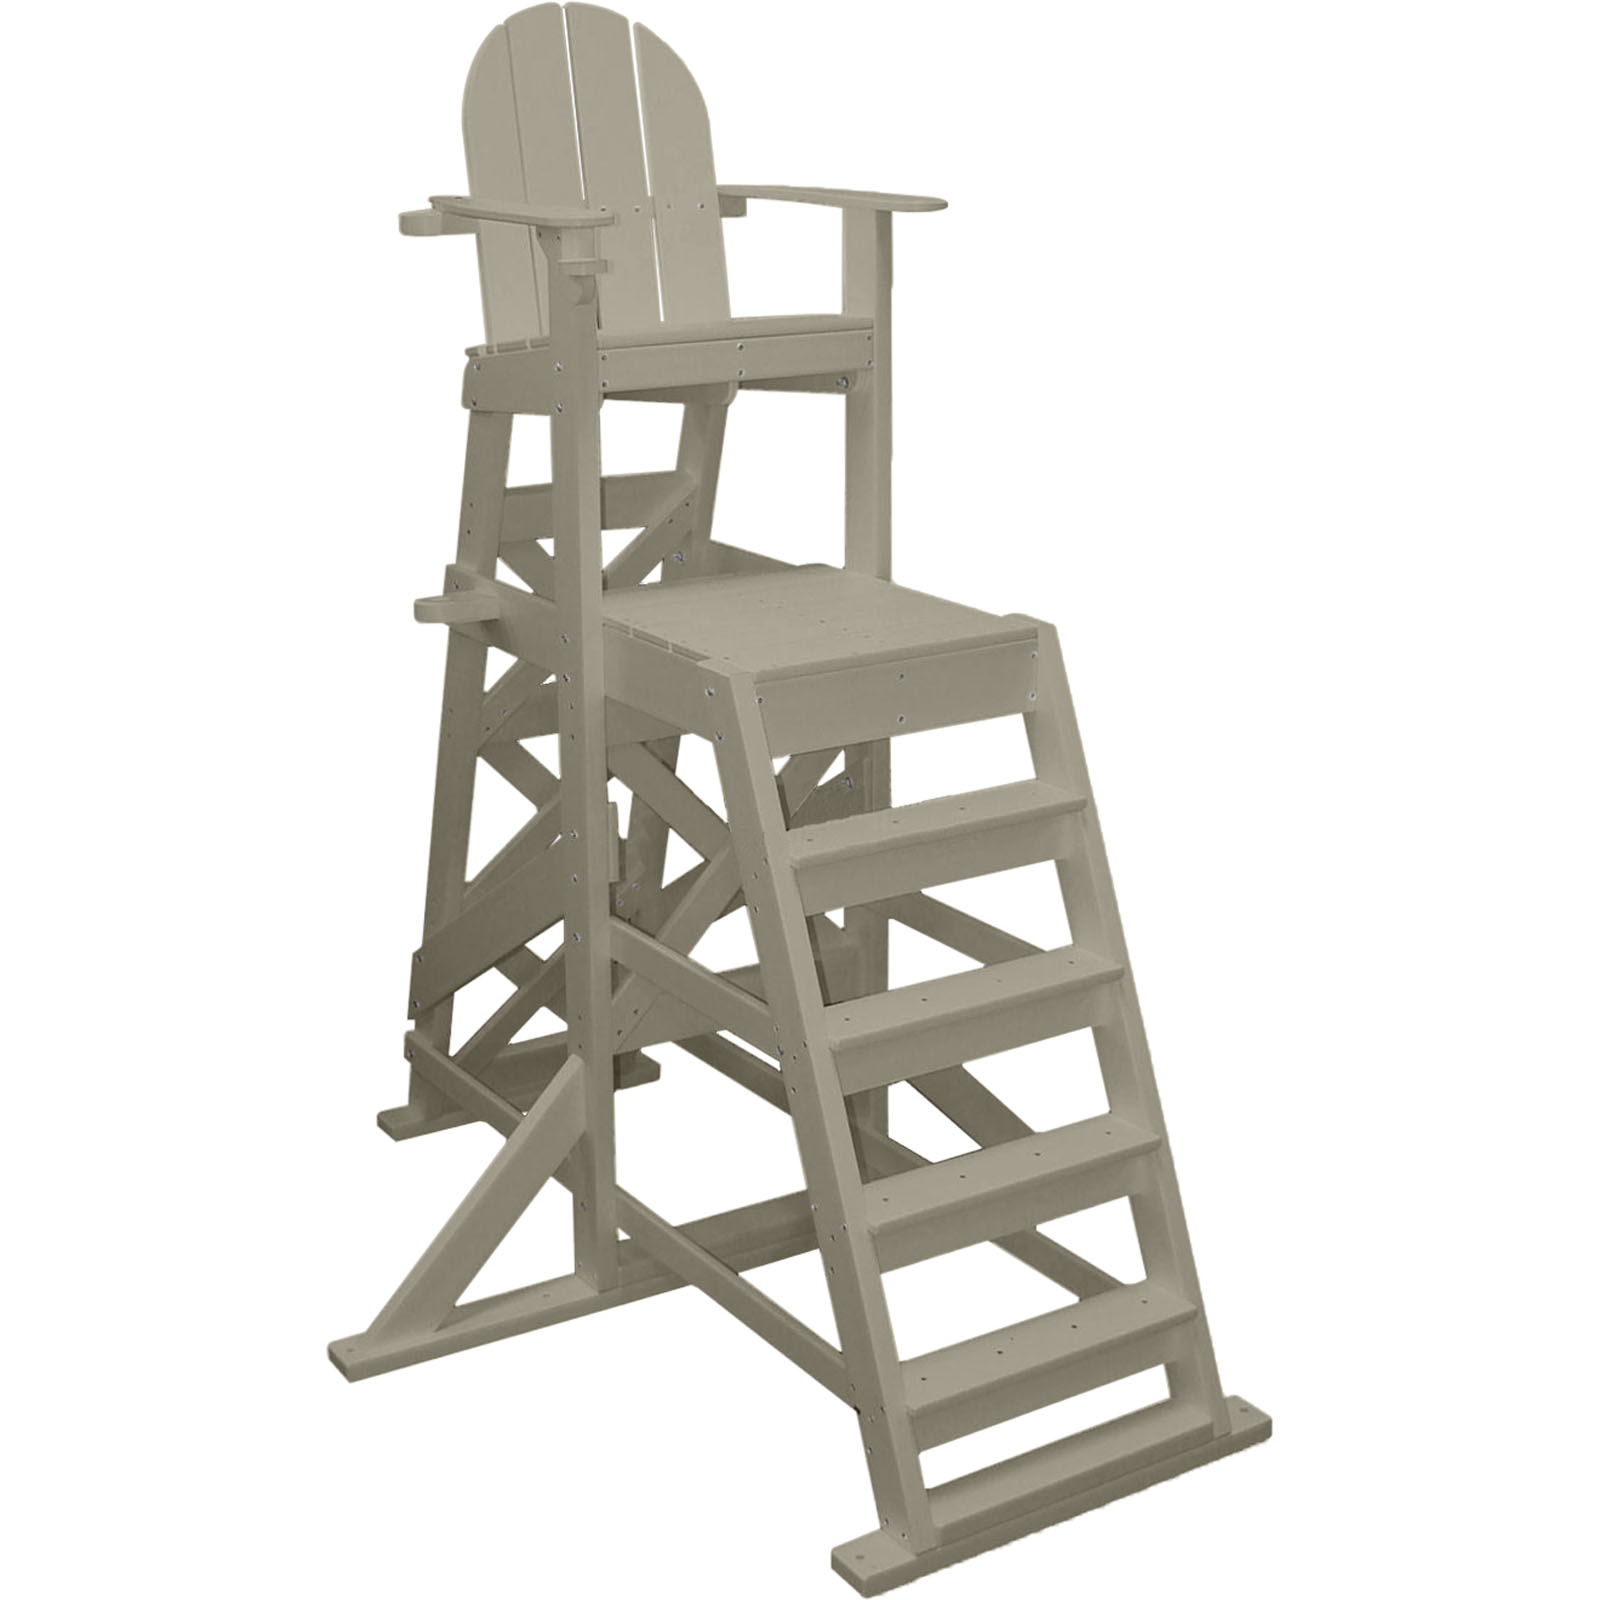 Picture of TLG535s Lifeguard Chair Tailwind  Front ladder 64" Tall Sand